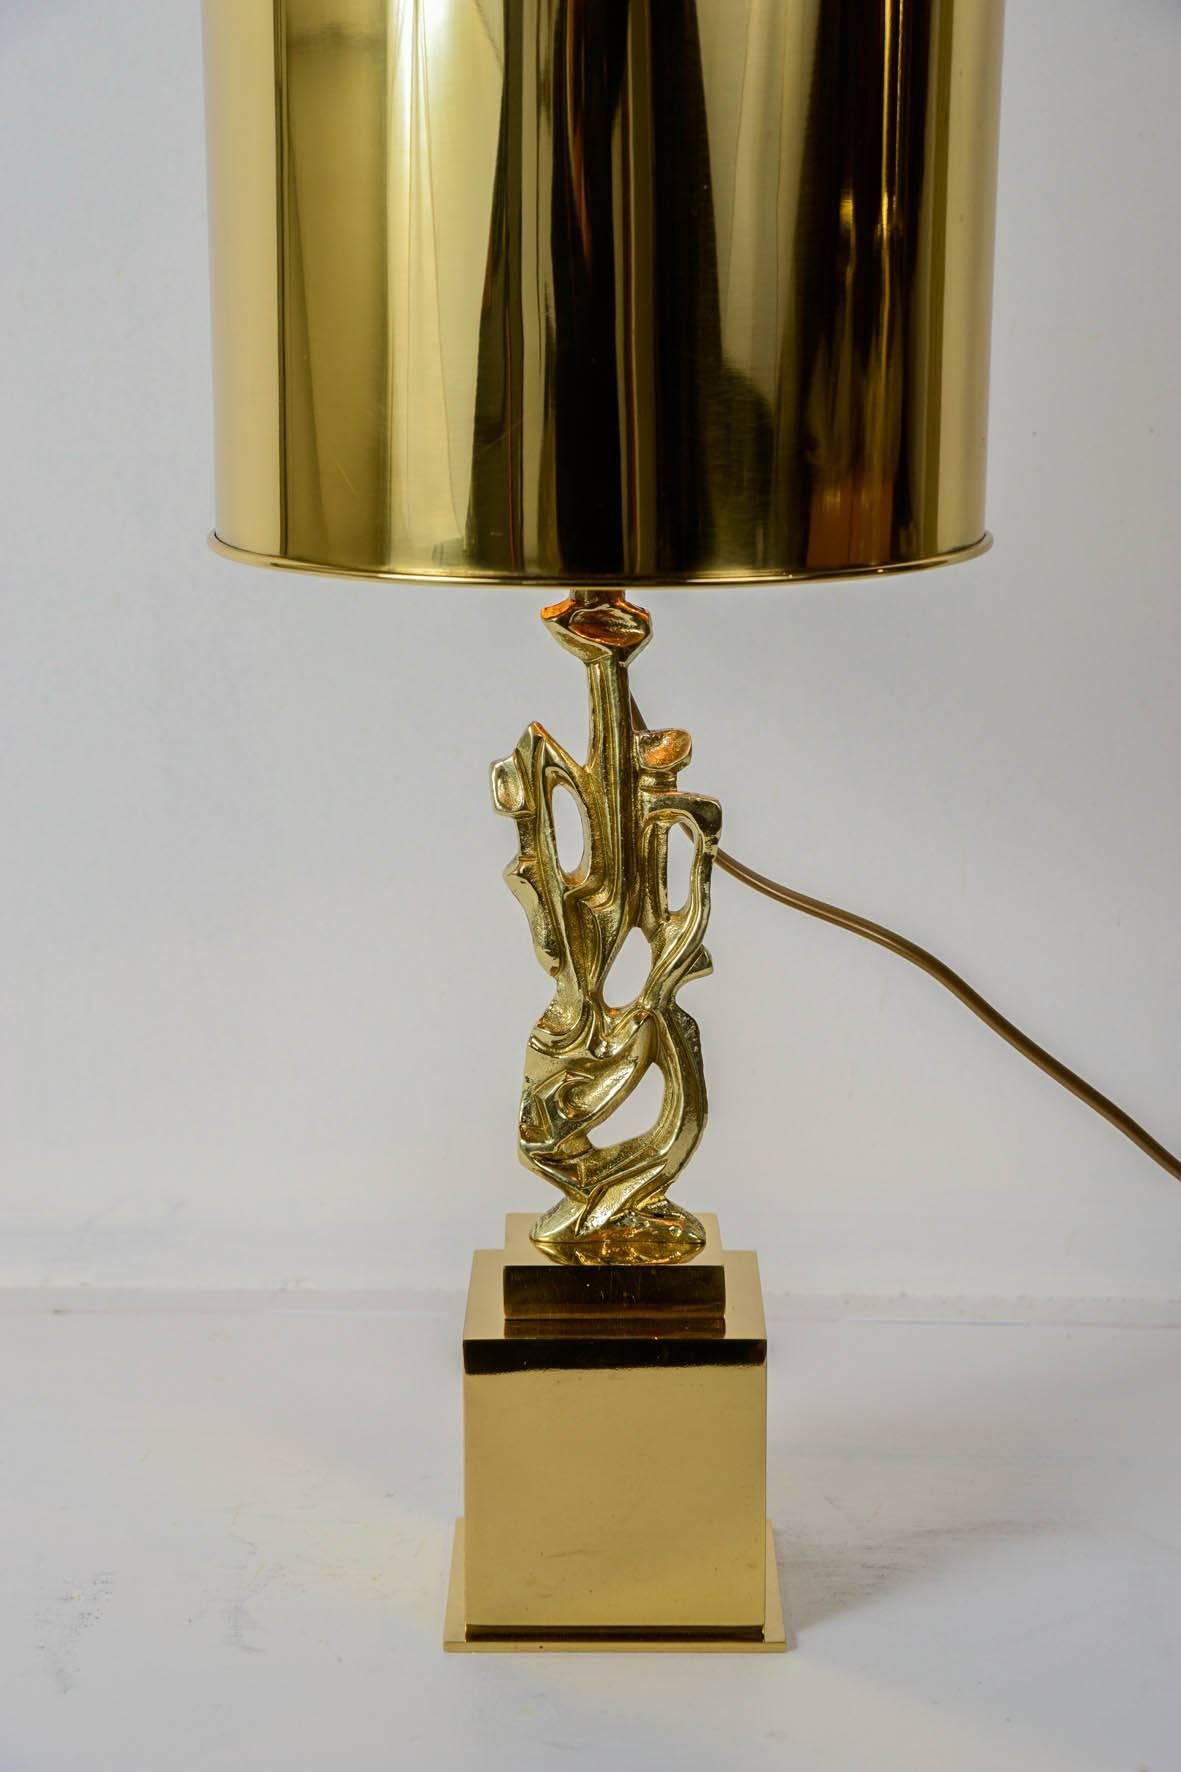 Pair of sculptural bronze lamps
signed.